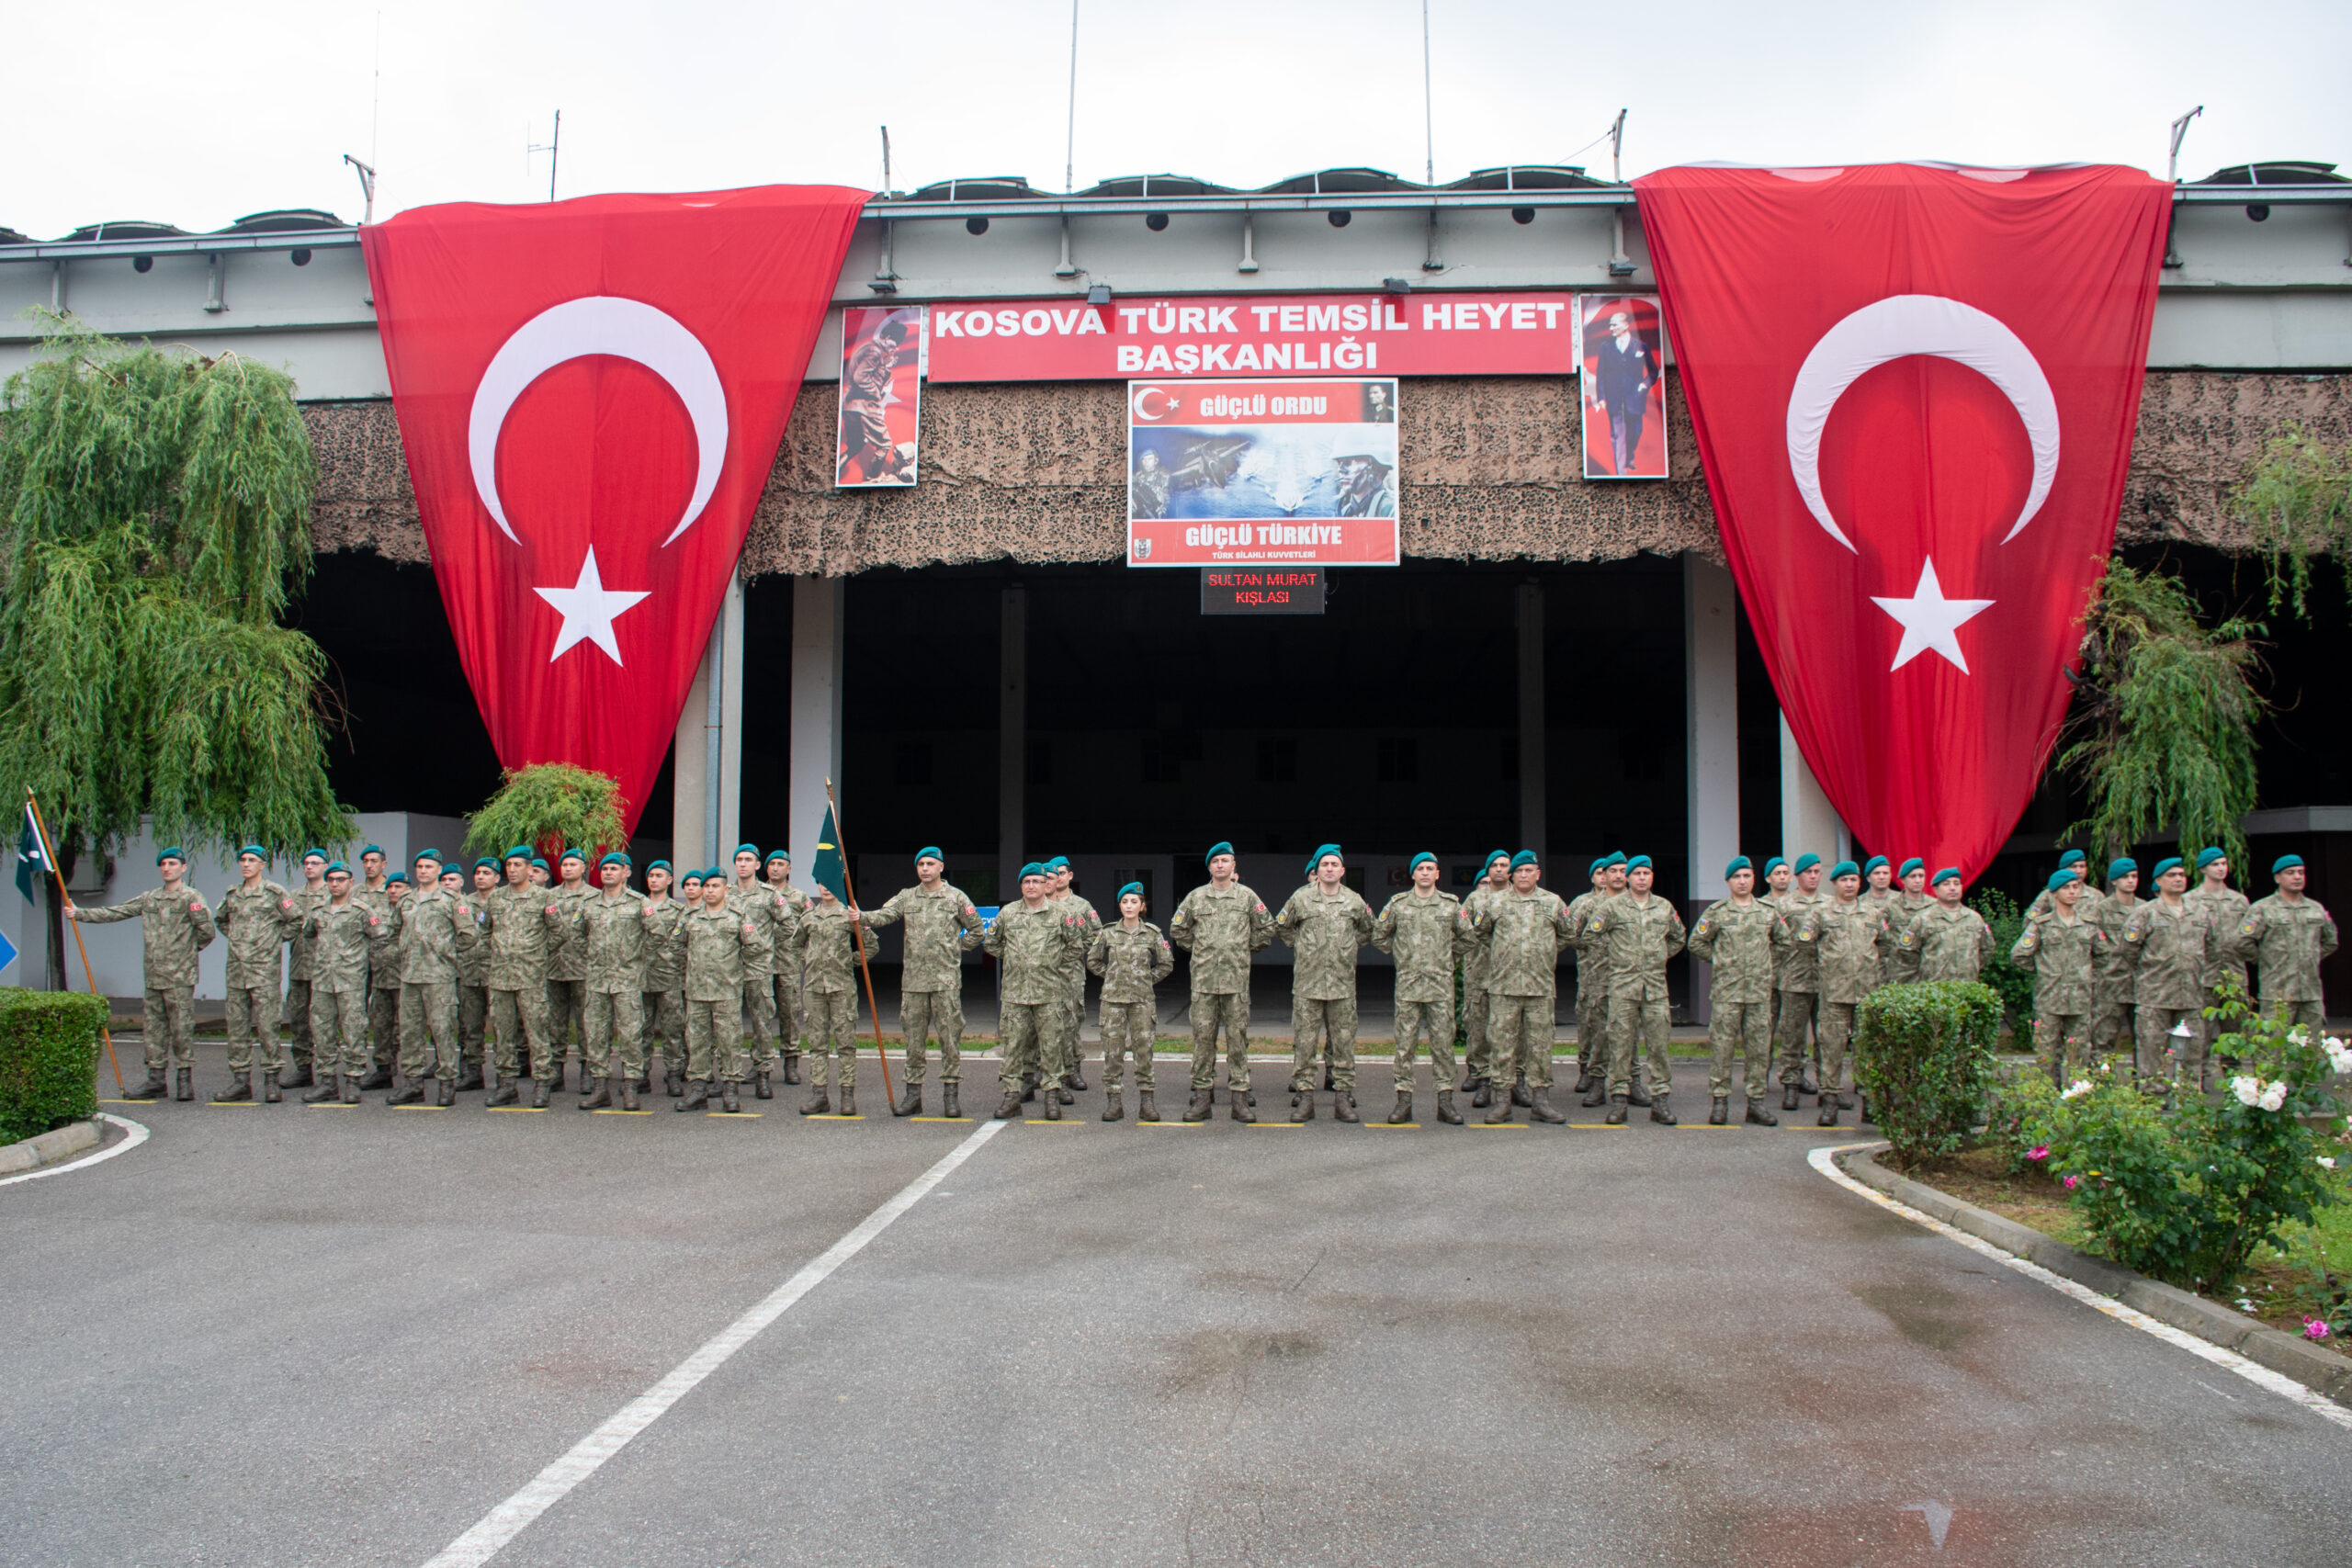 Arrival of Turkish soldiers in Kosovo: 25 years of historic enthusiasm, unity